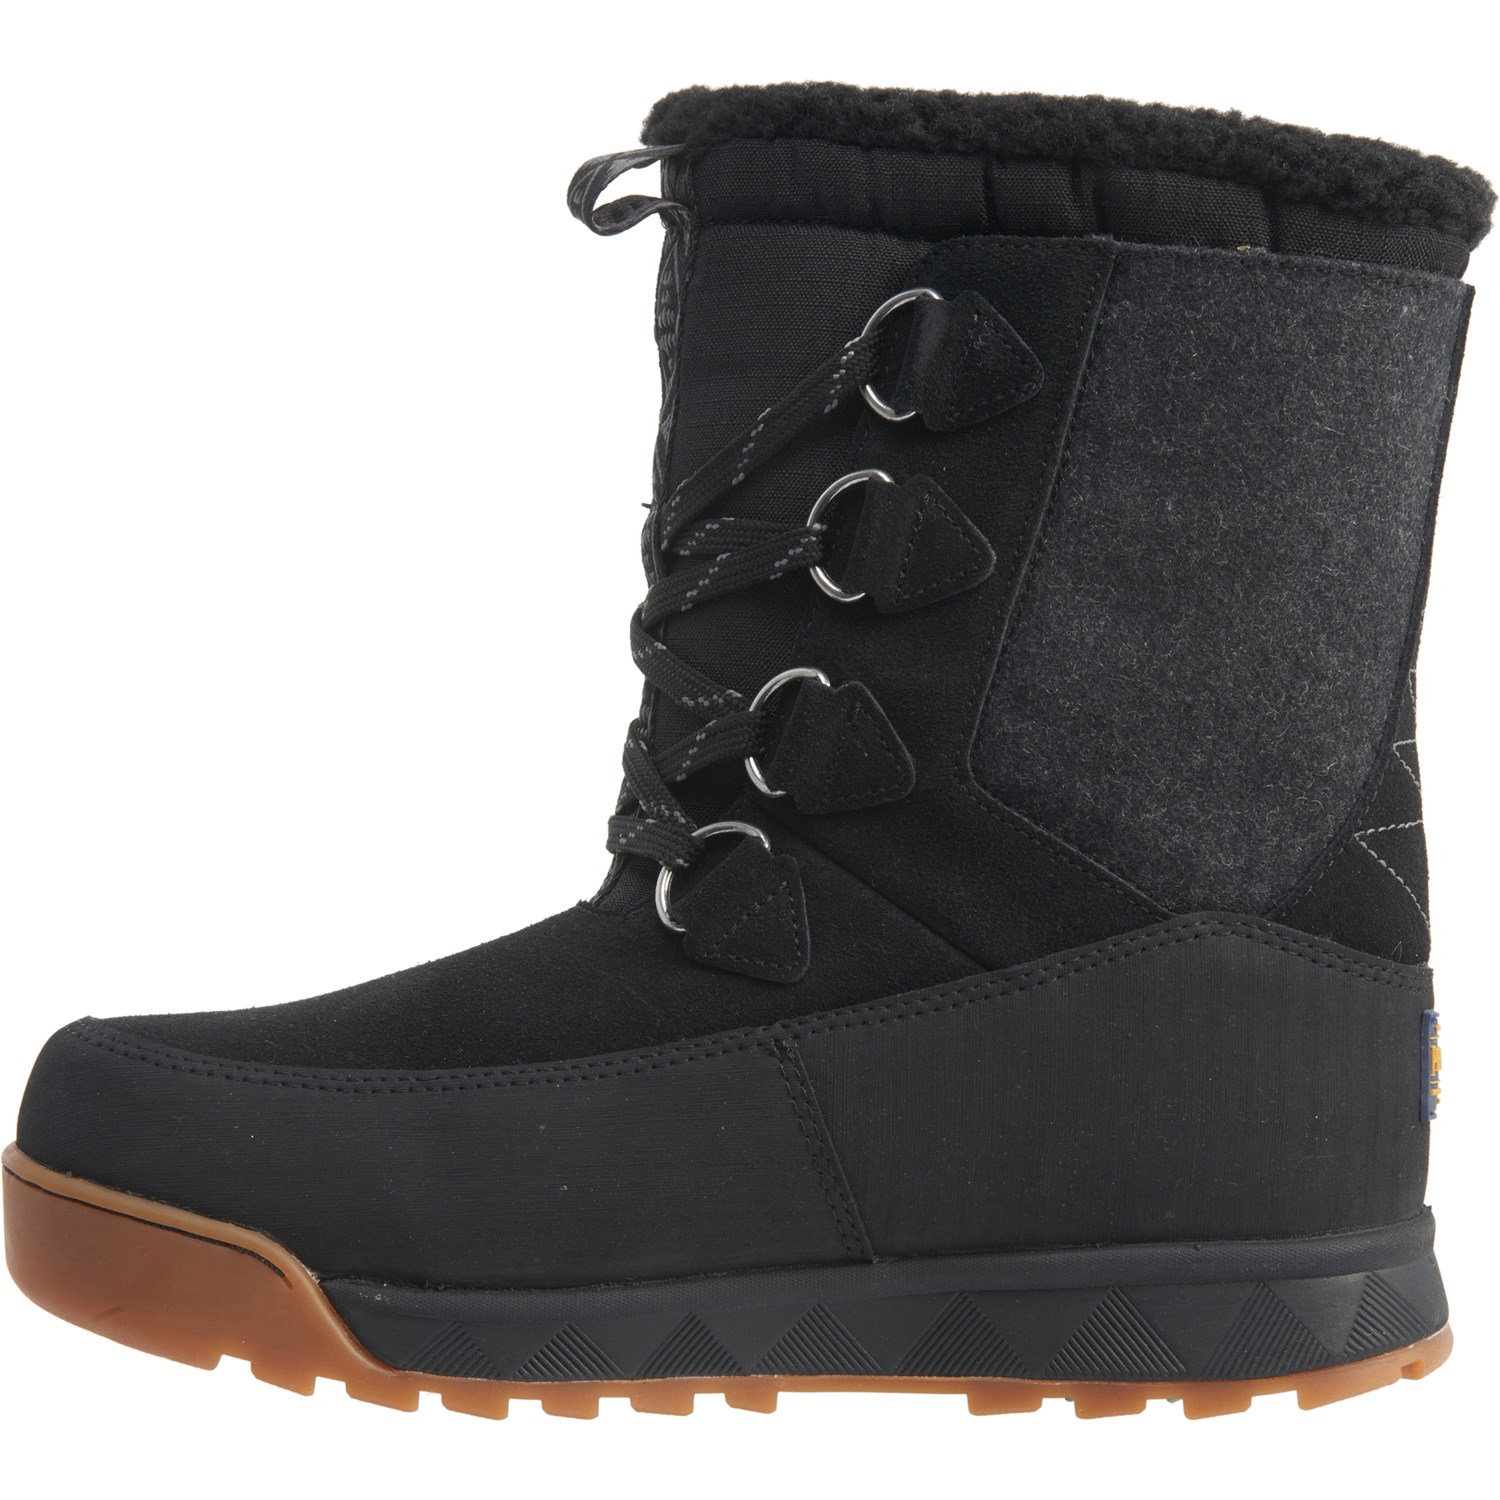 Pendleton Bay Trek Leather and Wool Snow Boots (For Women) - Save 52%